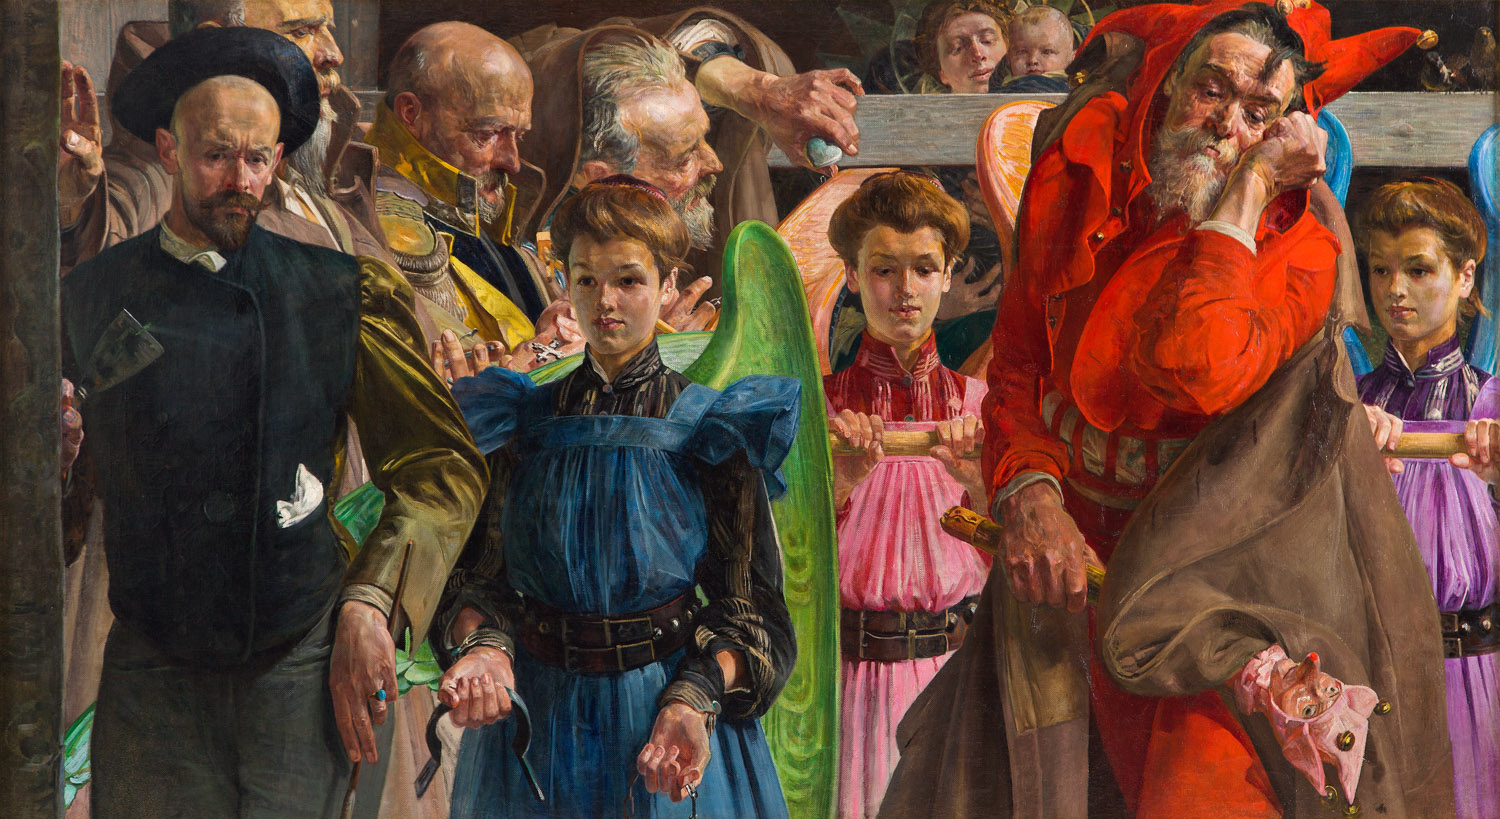 SENSATIONAL EVENT IN THE WORLD OF POLISH ART AND CULTURE - found after 96 years, the prophetic masterpiece by Jacek Malczewski at the exhibition and up for auction in DESA UNICUM 